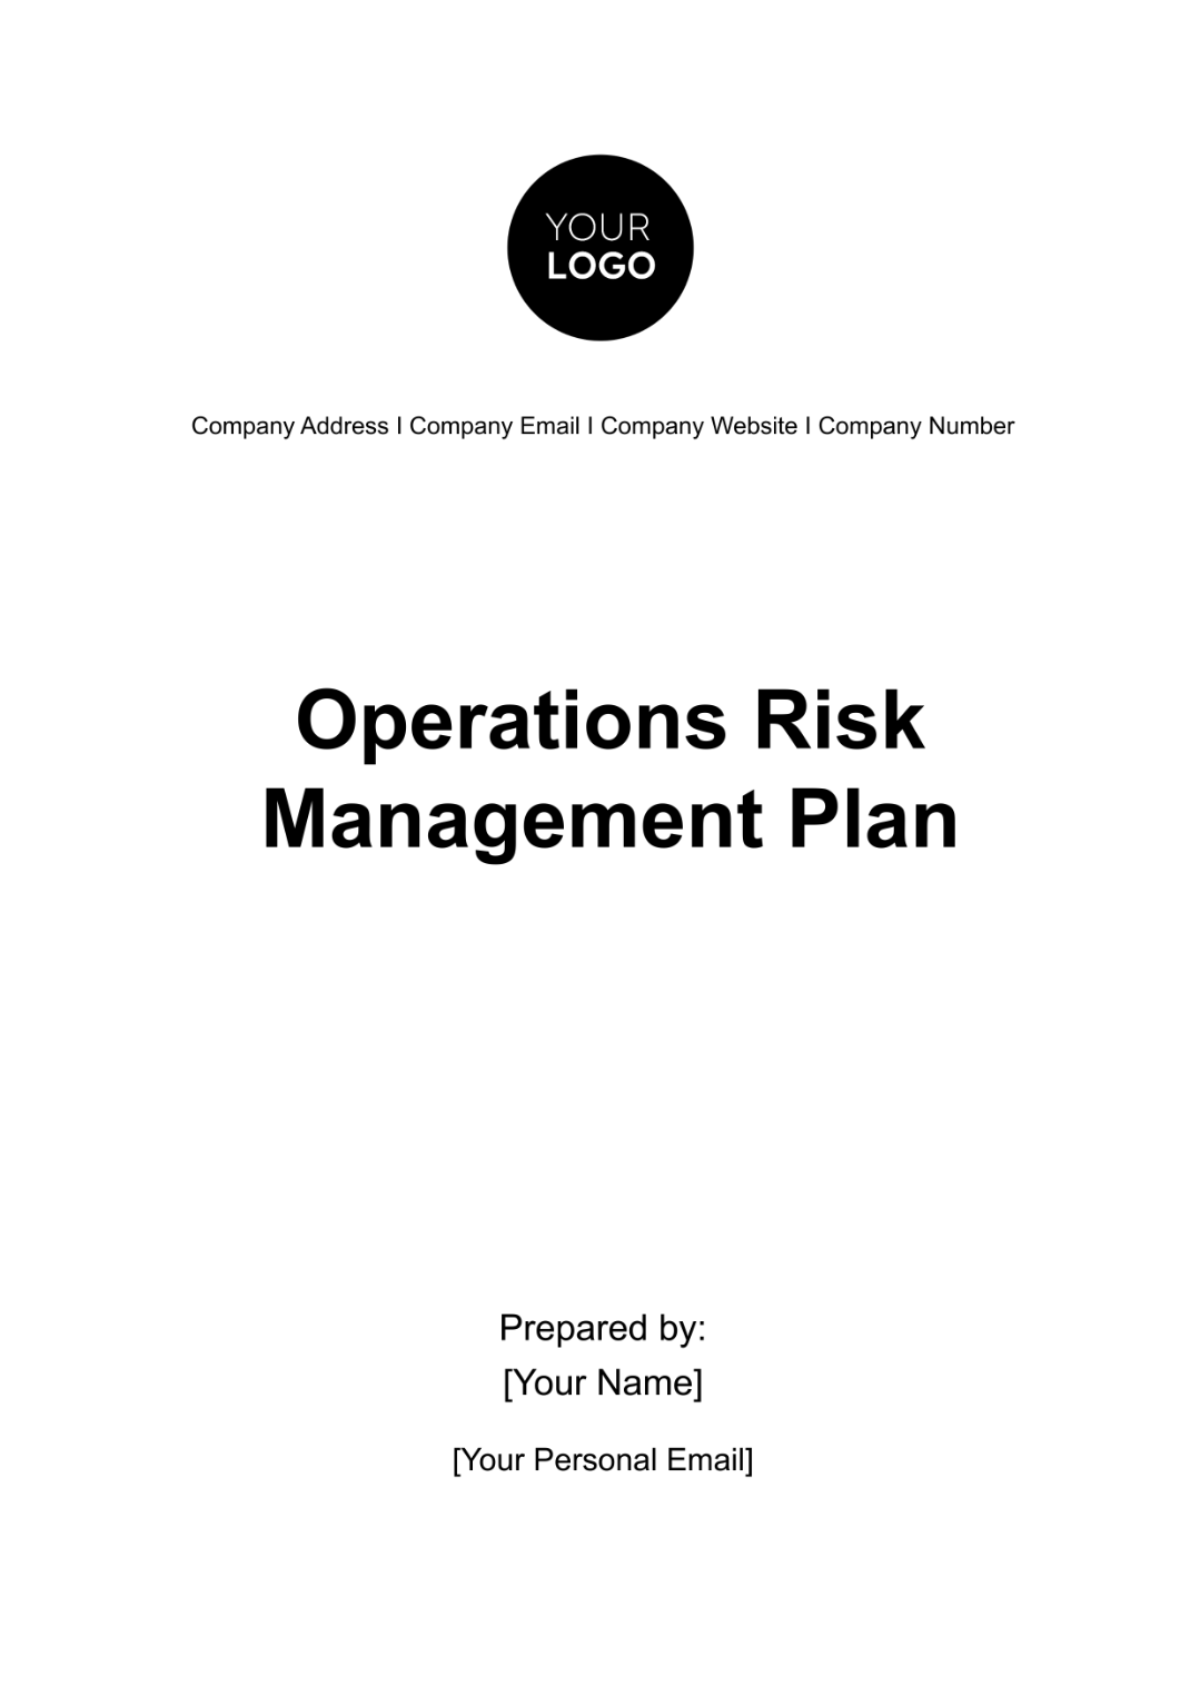 Operations Risk Management Plan Template